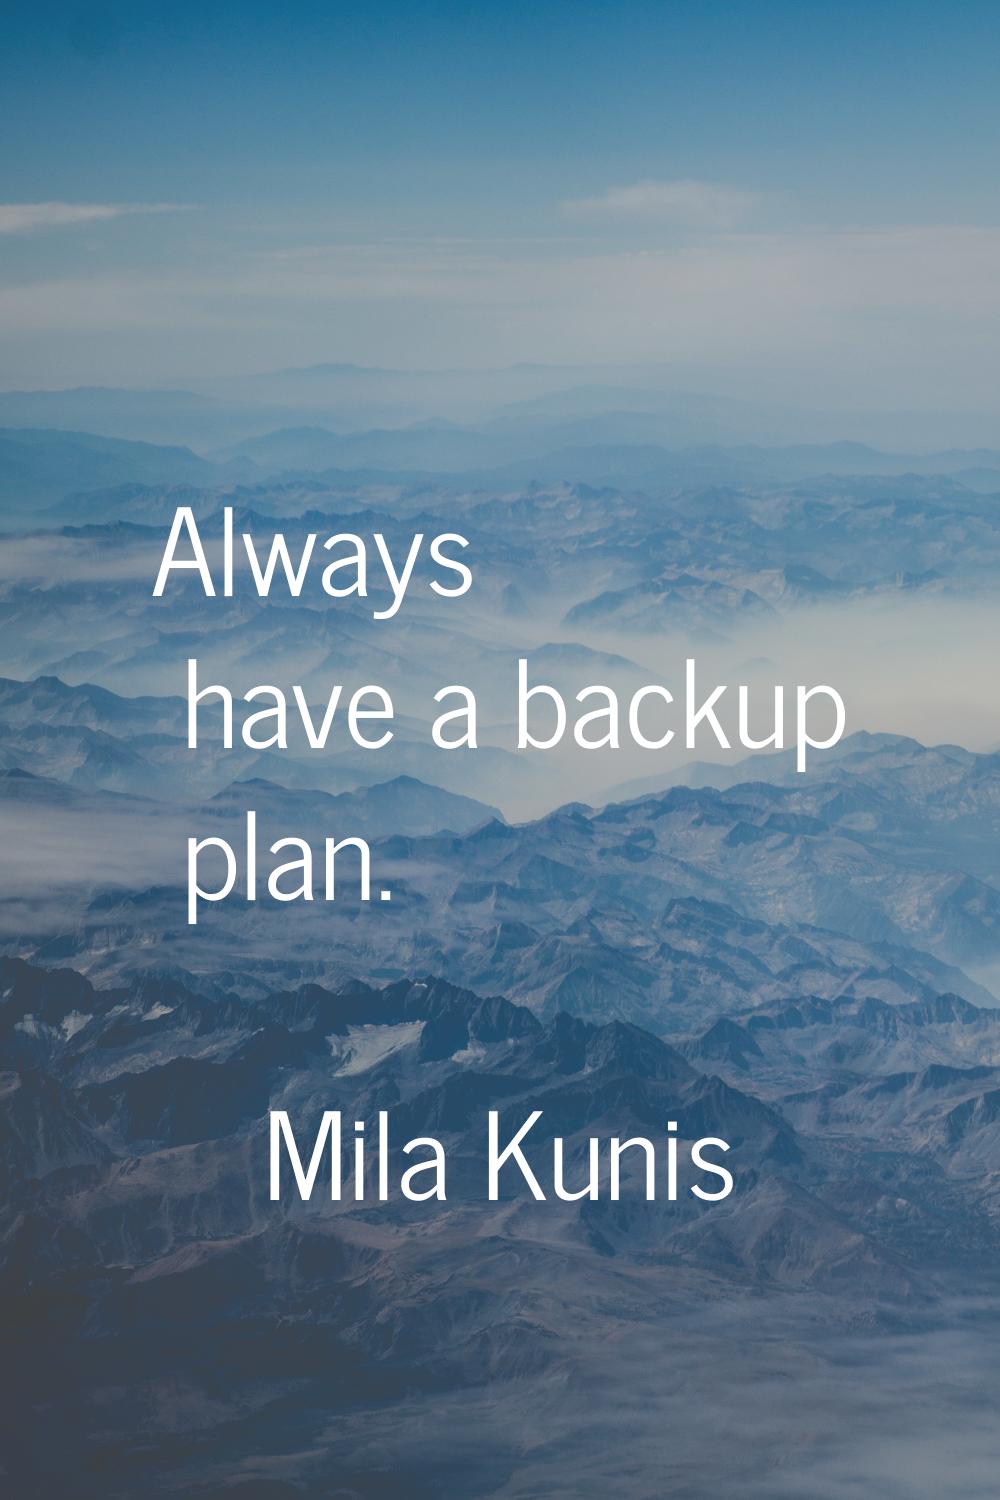 Always have a backup plan.